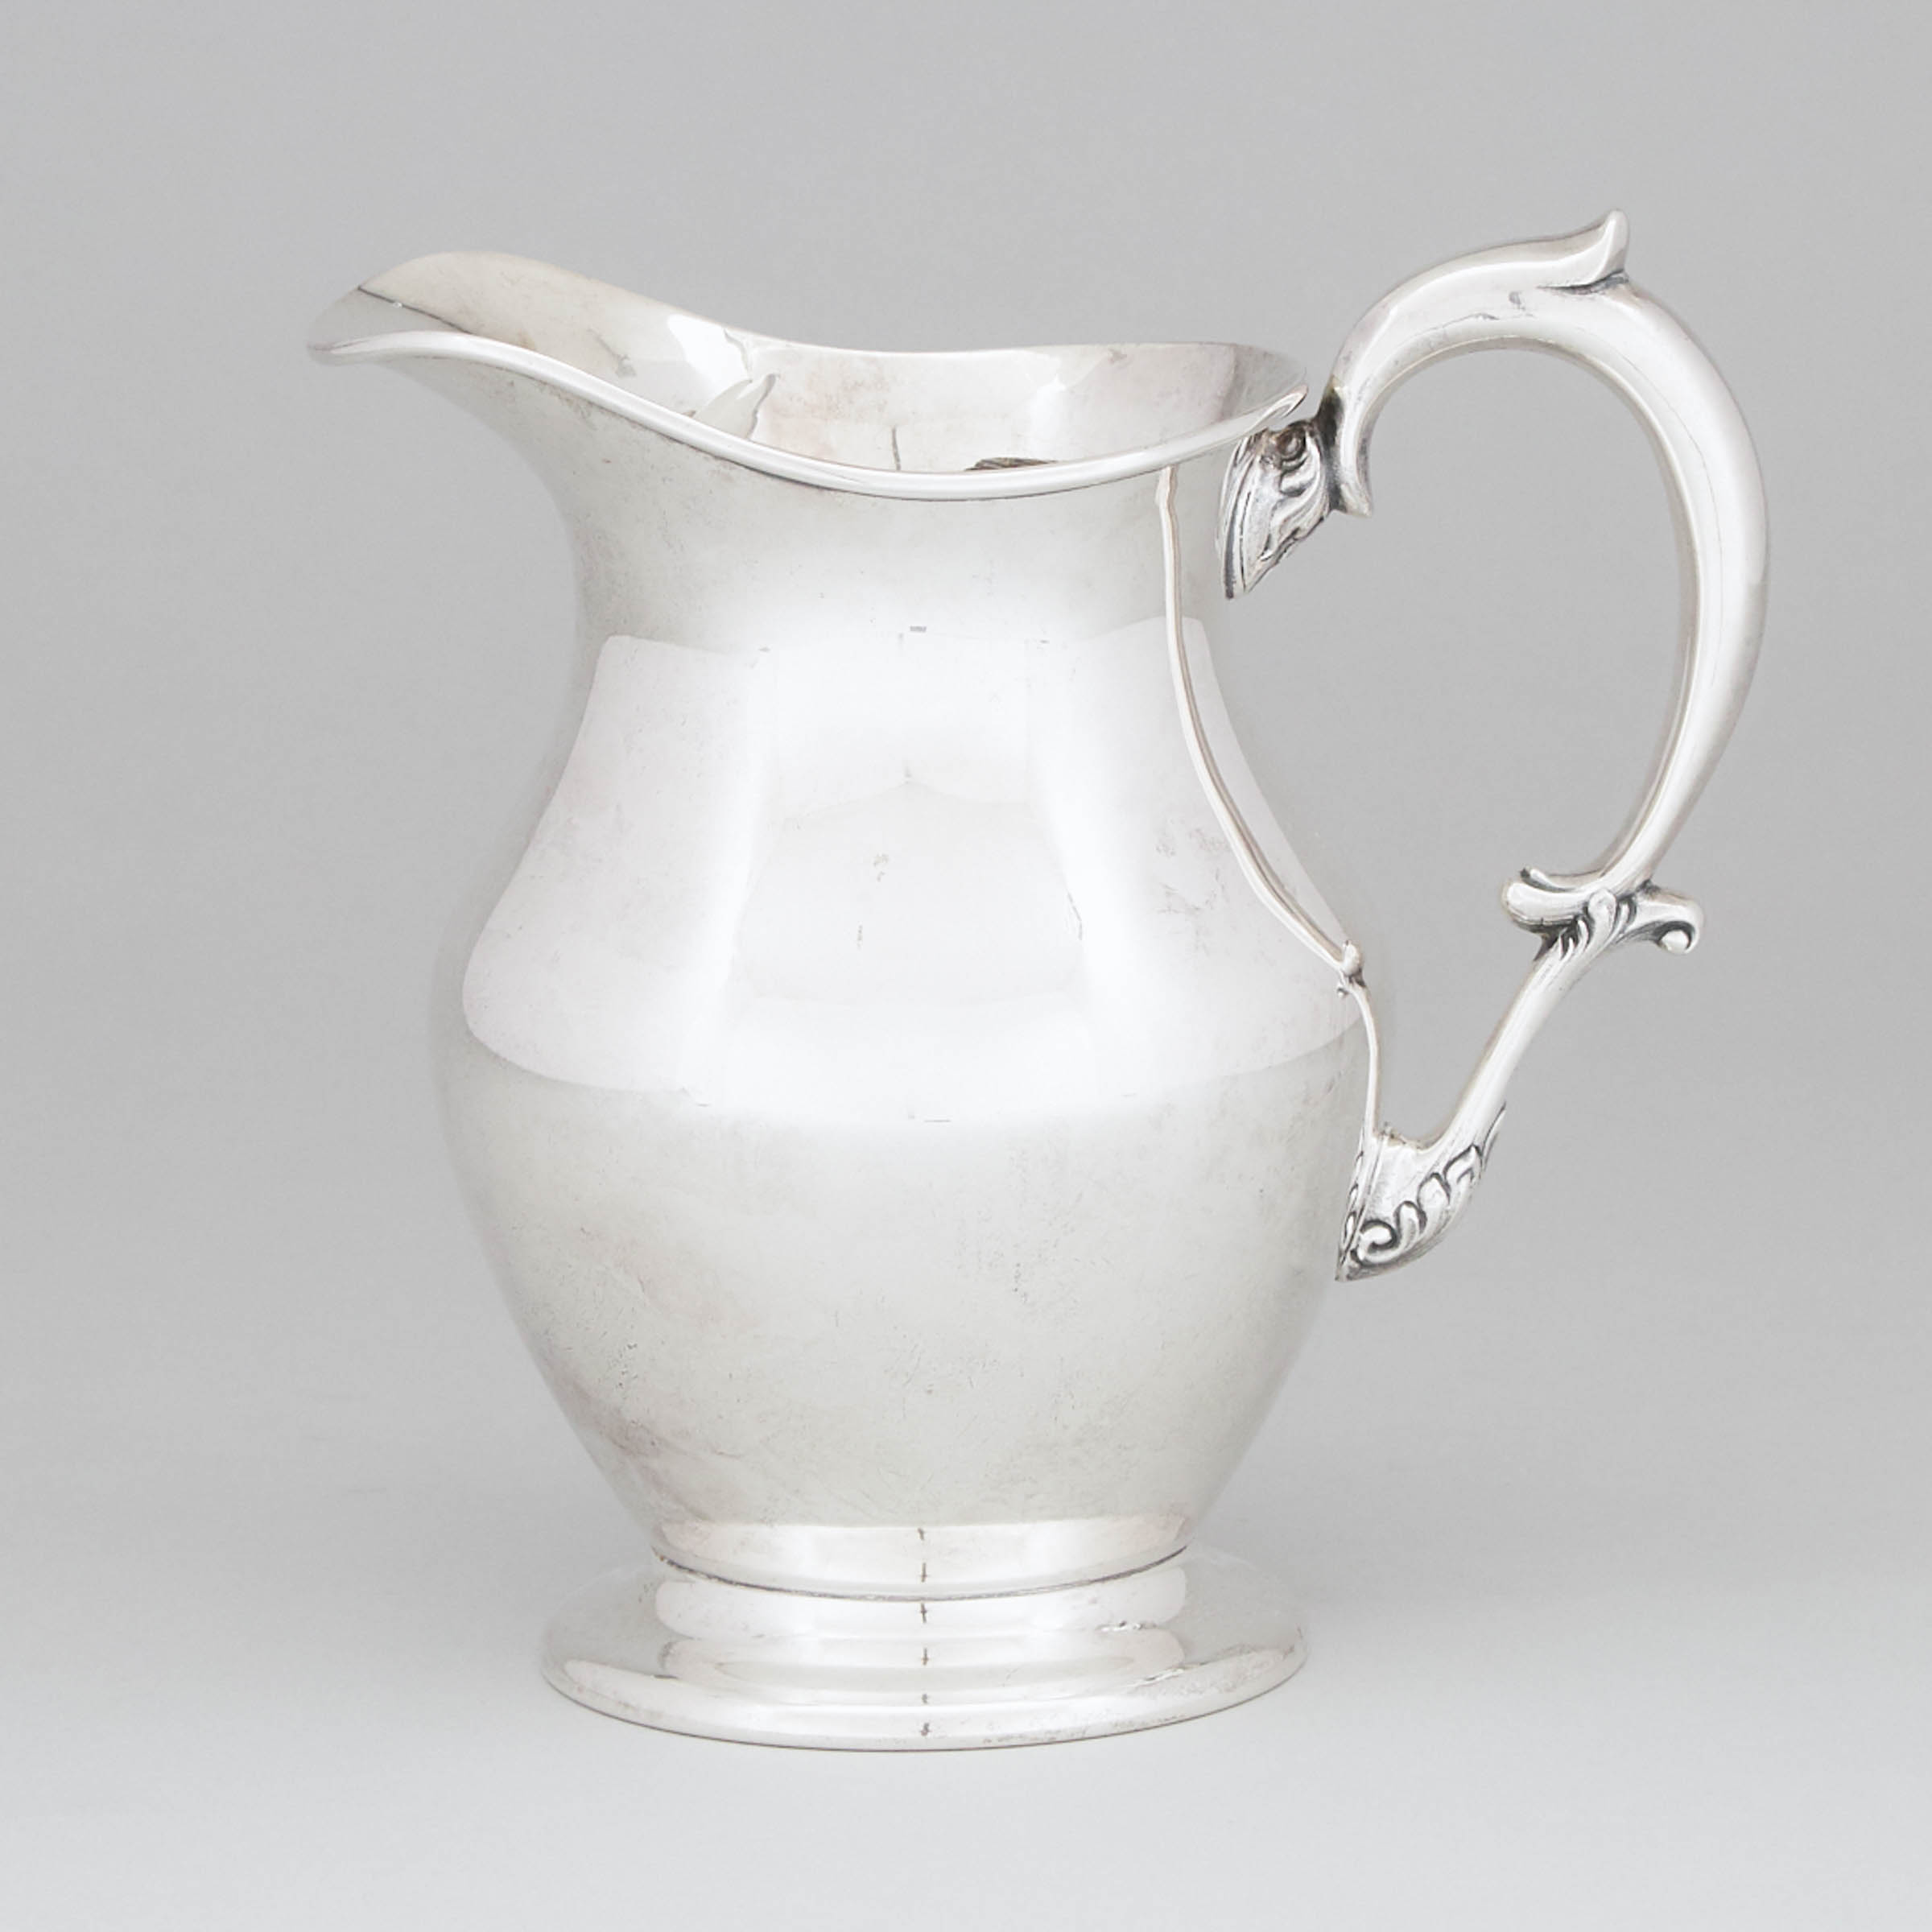 Canadian Silver Water Jug, Henry Birks & Sons, Montreal, Que., 1954